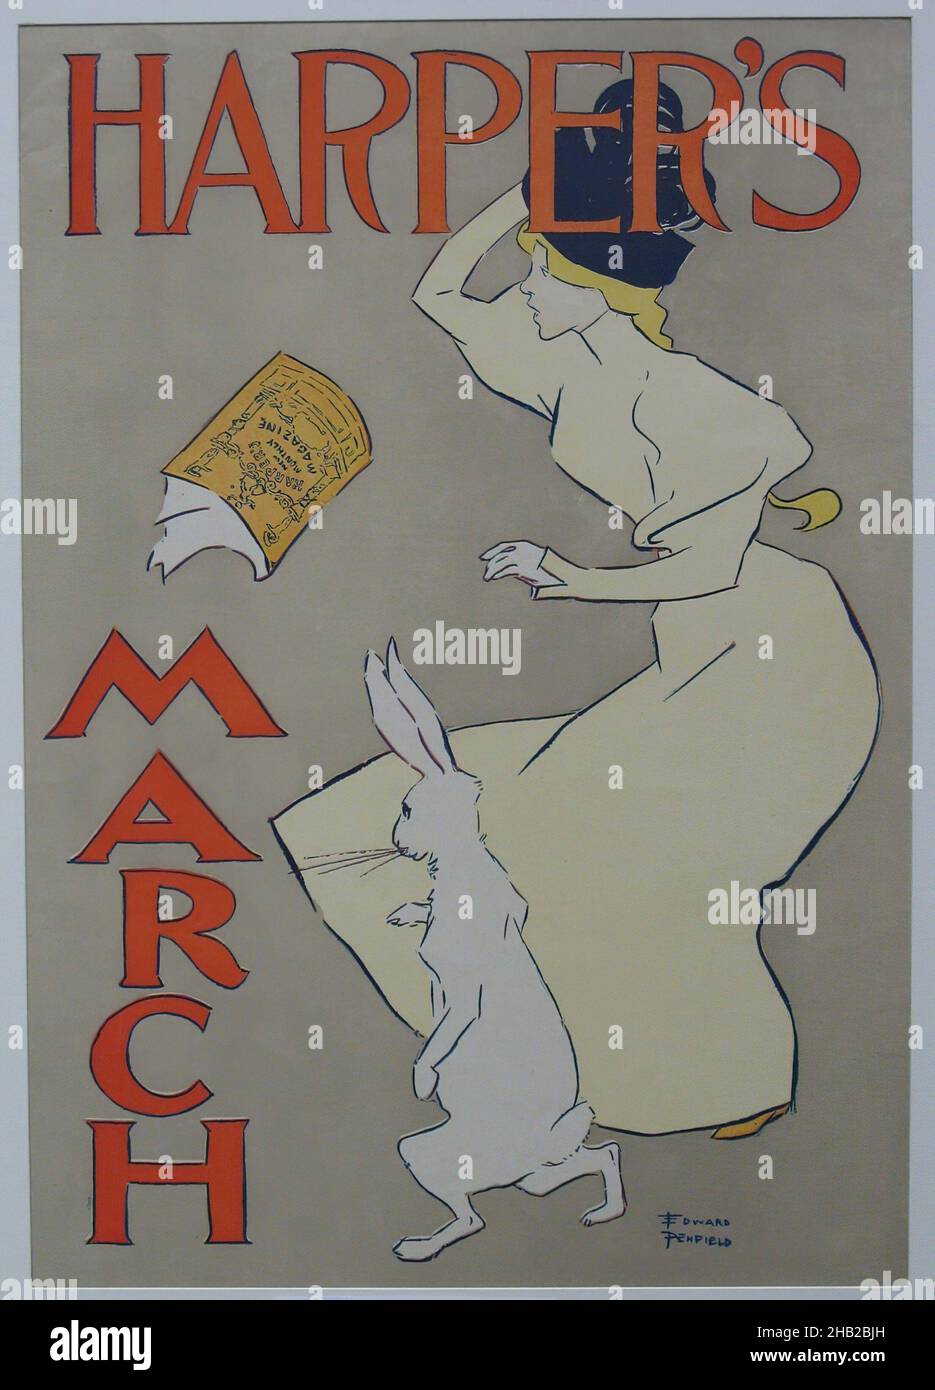 Harper's Poster - March 1895, Edward Penfield, American, 1866-1925, Lithograph on wove paper, 1895, Sheet: 19 1/4 x 13 7/8 in., 48.9 x 35.2 cm, book, bunny, dress, fin de siecle, hat, rabbit, style, windy, woman, women and books Stock Photo